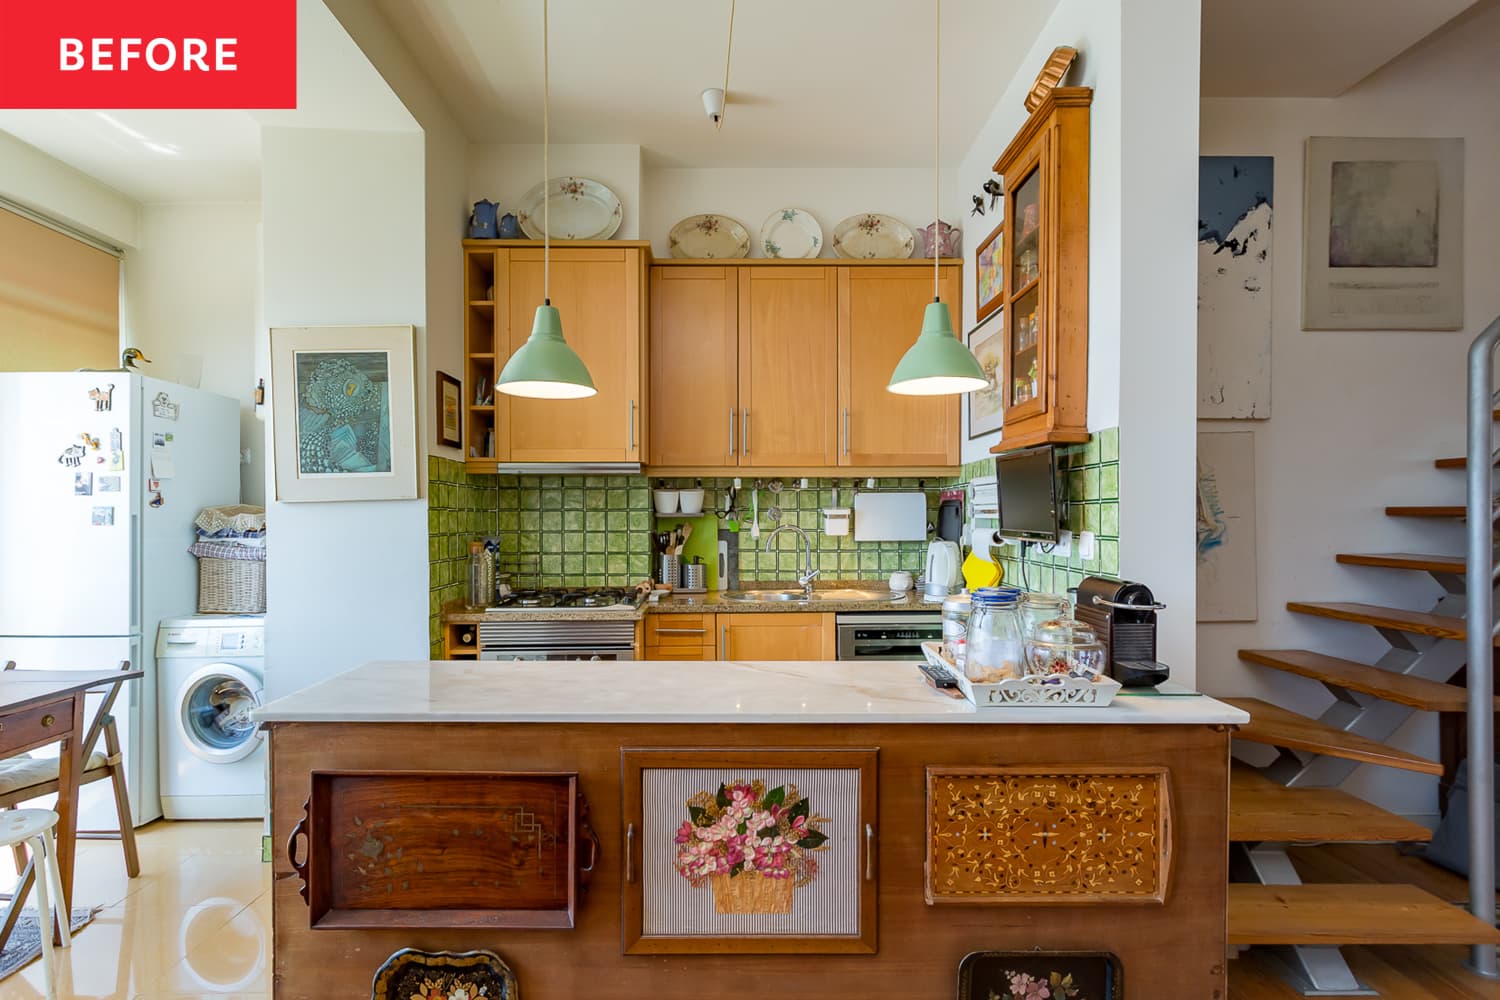 See How This Dated Kitchen Got a “Decluttered” New Look (The Tile Stayed!)